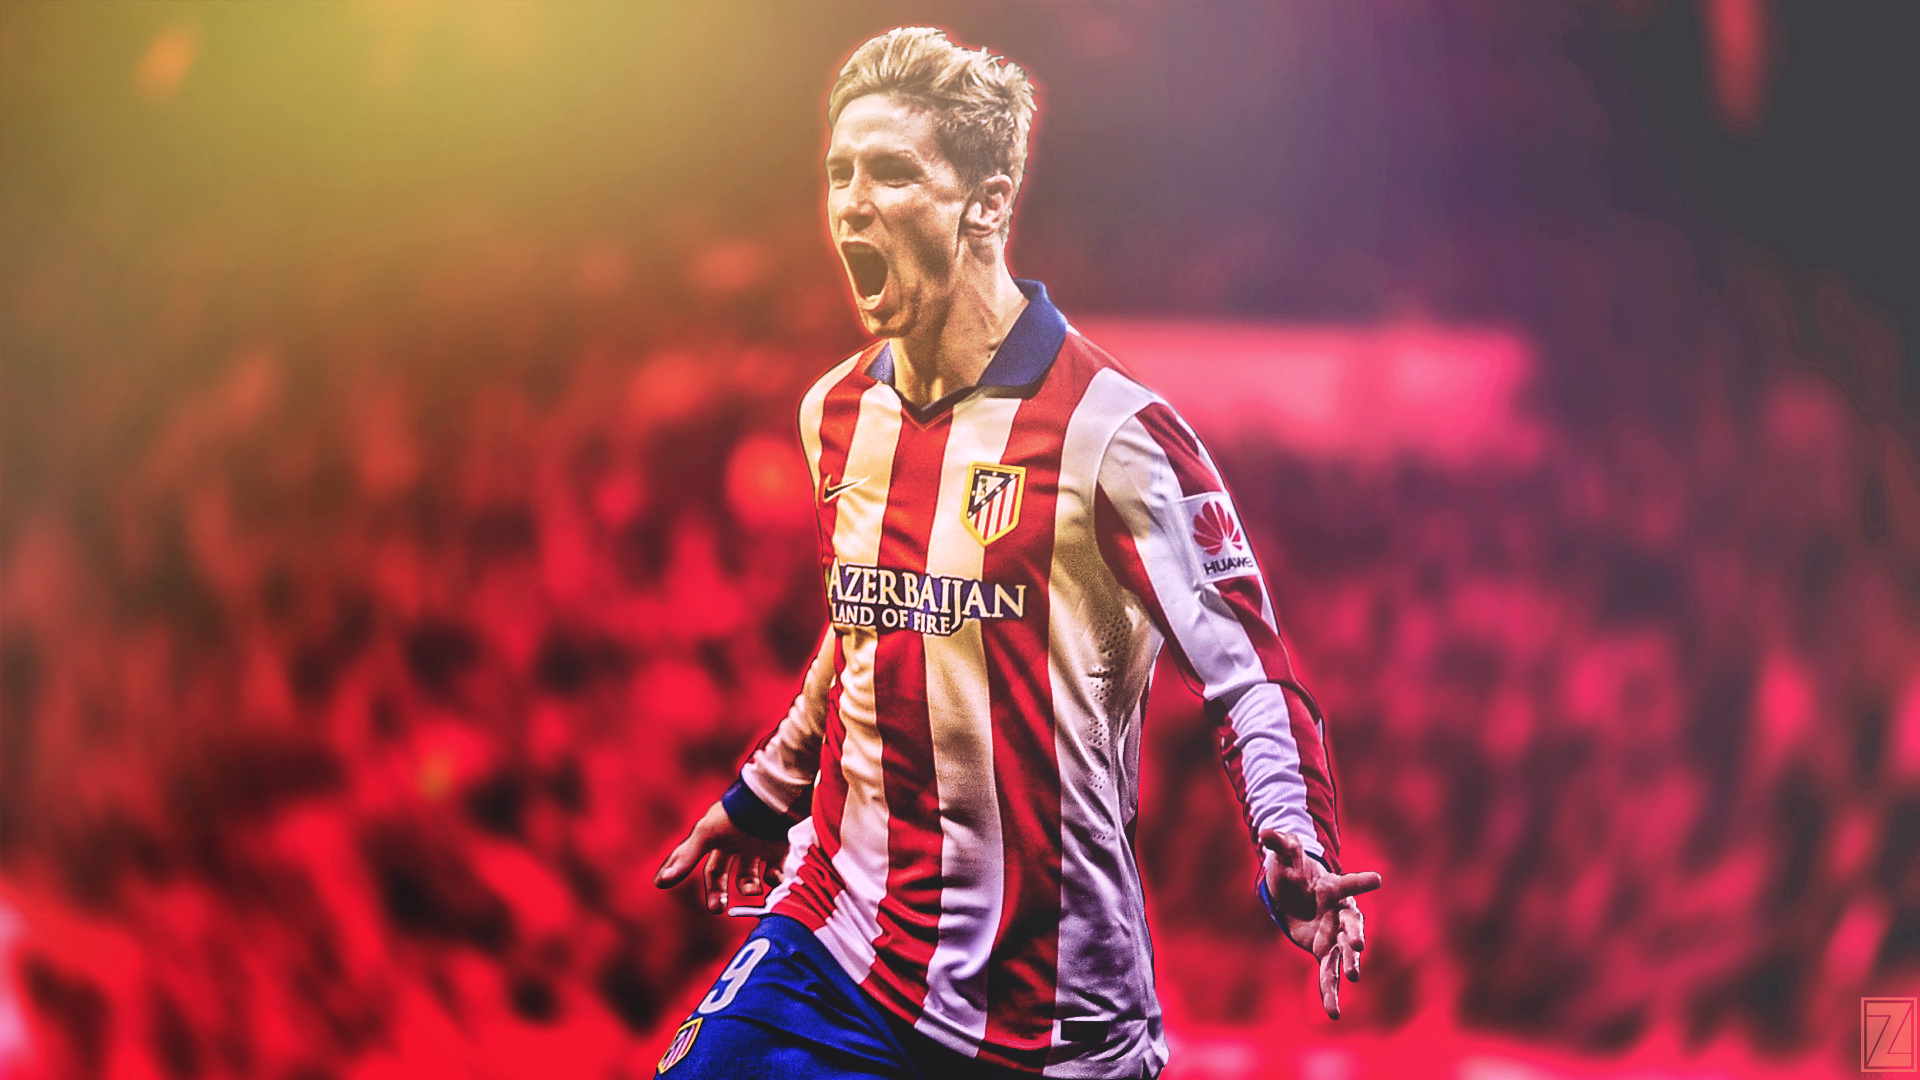 Atletico Madrid: Fernando Torres, Jesus Gil closed down the club's youth academy in 1992. 1920x1080 Full HD Background.